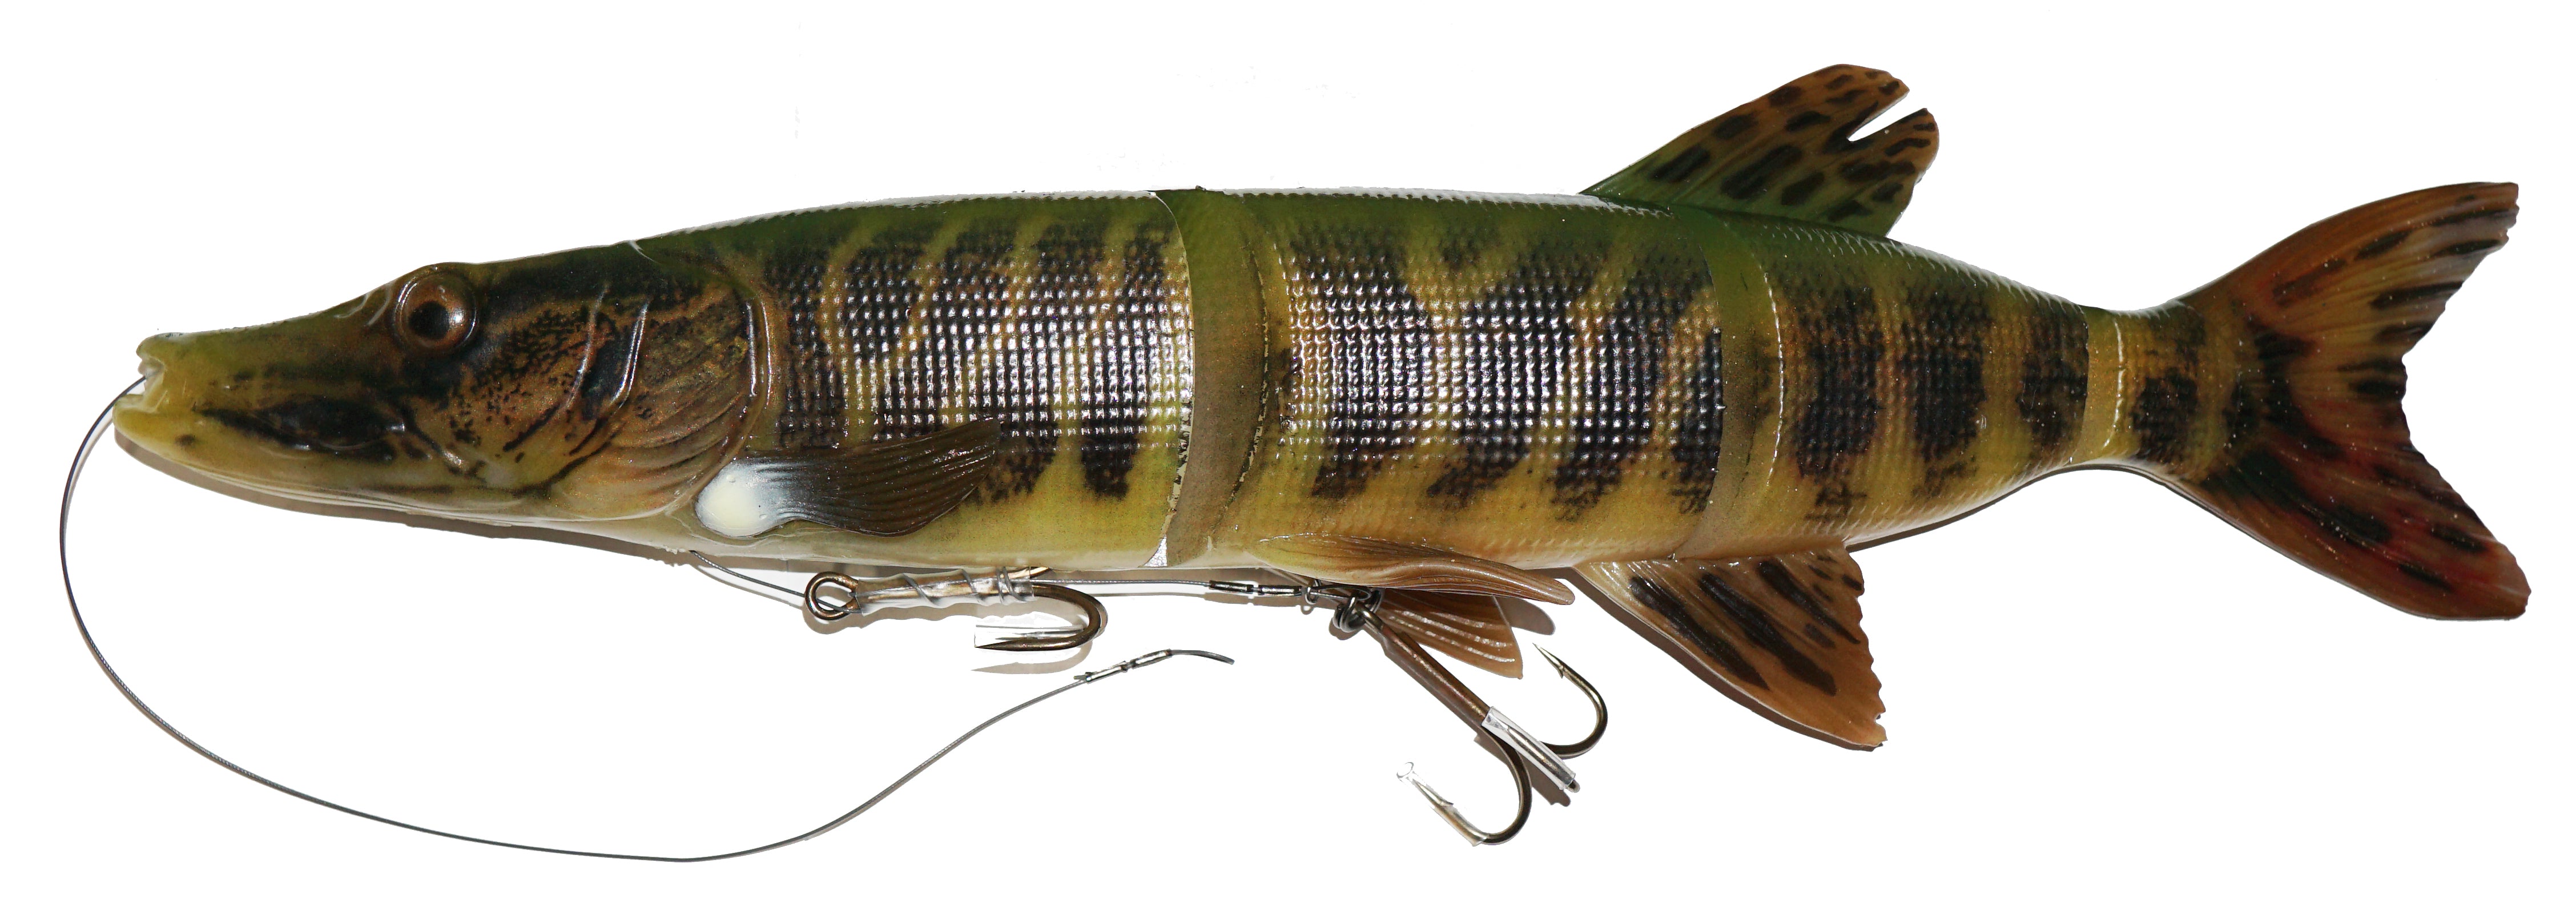 Savage Gear 4D Line Thru Pulse Tail Trout Lures - Pike Zander Salmon Fishing